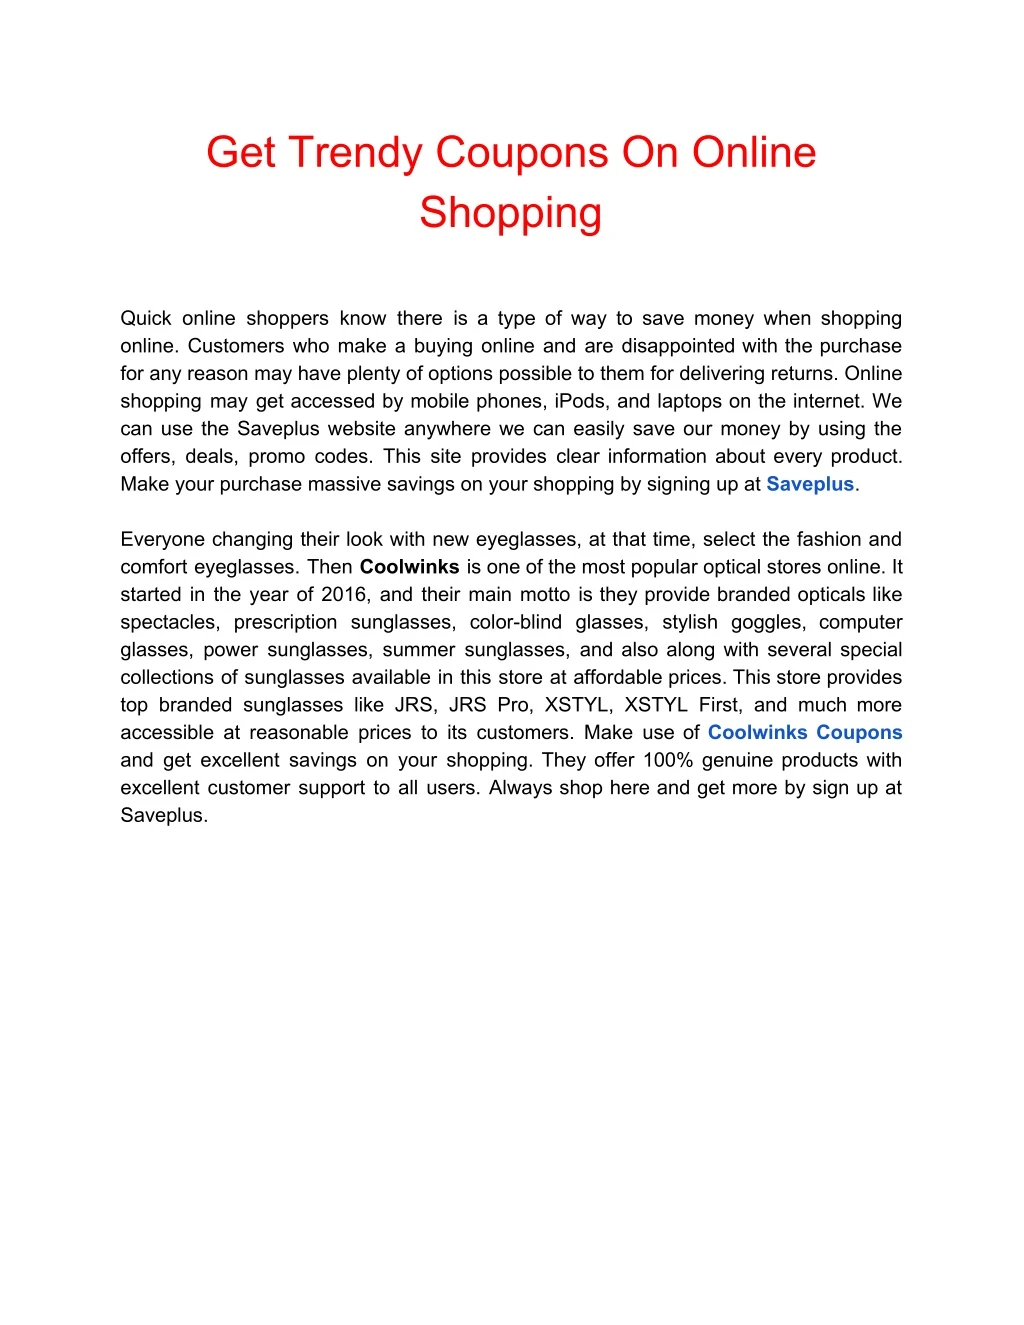 get trendy coupons on online shopping